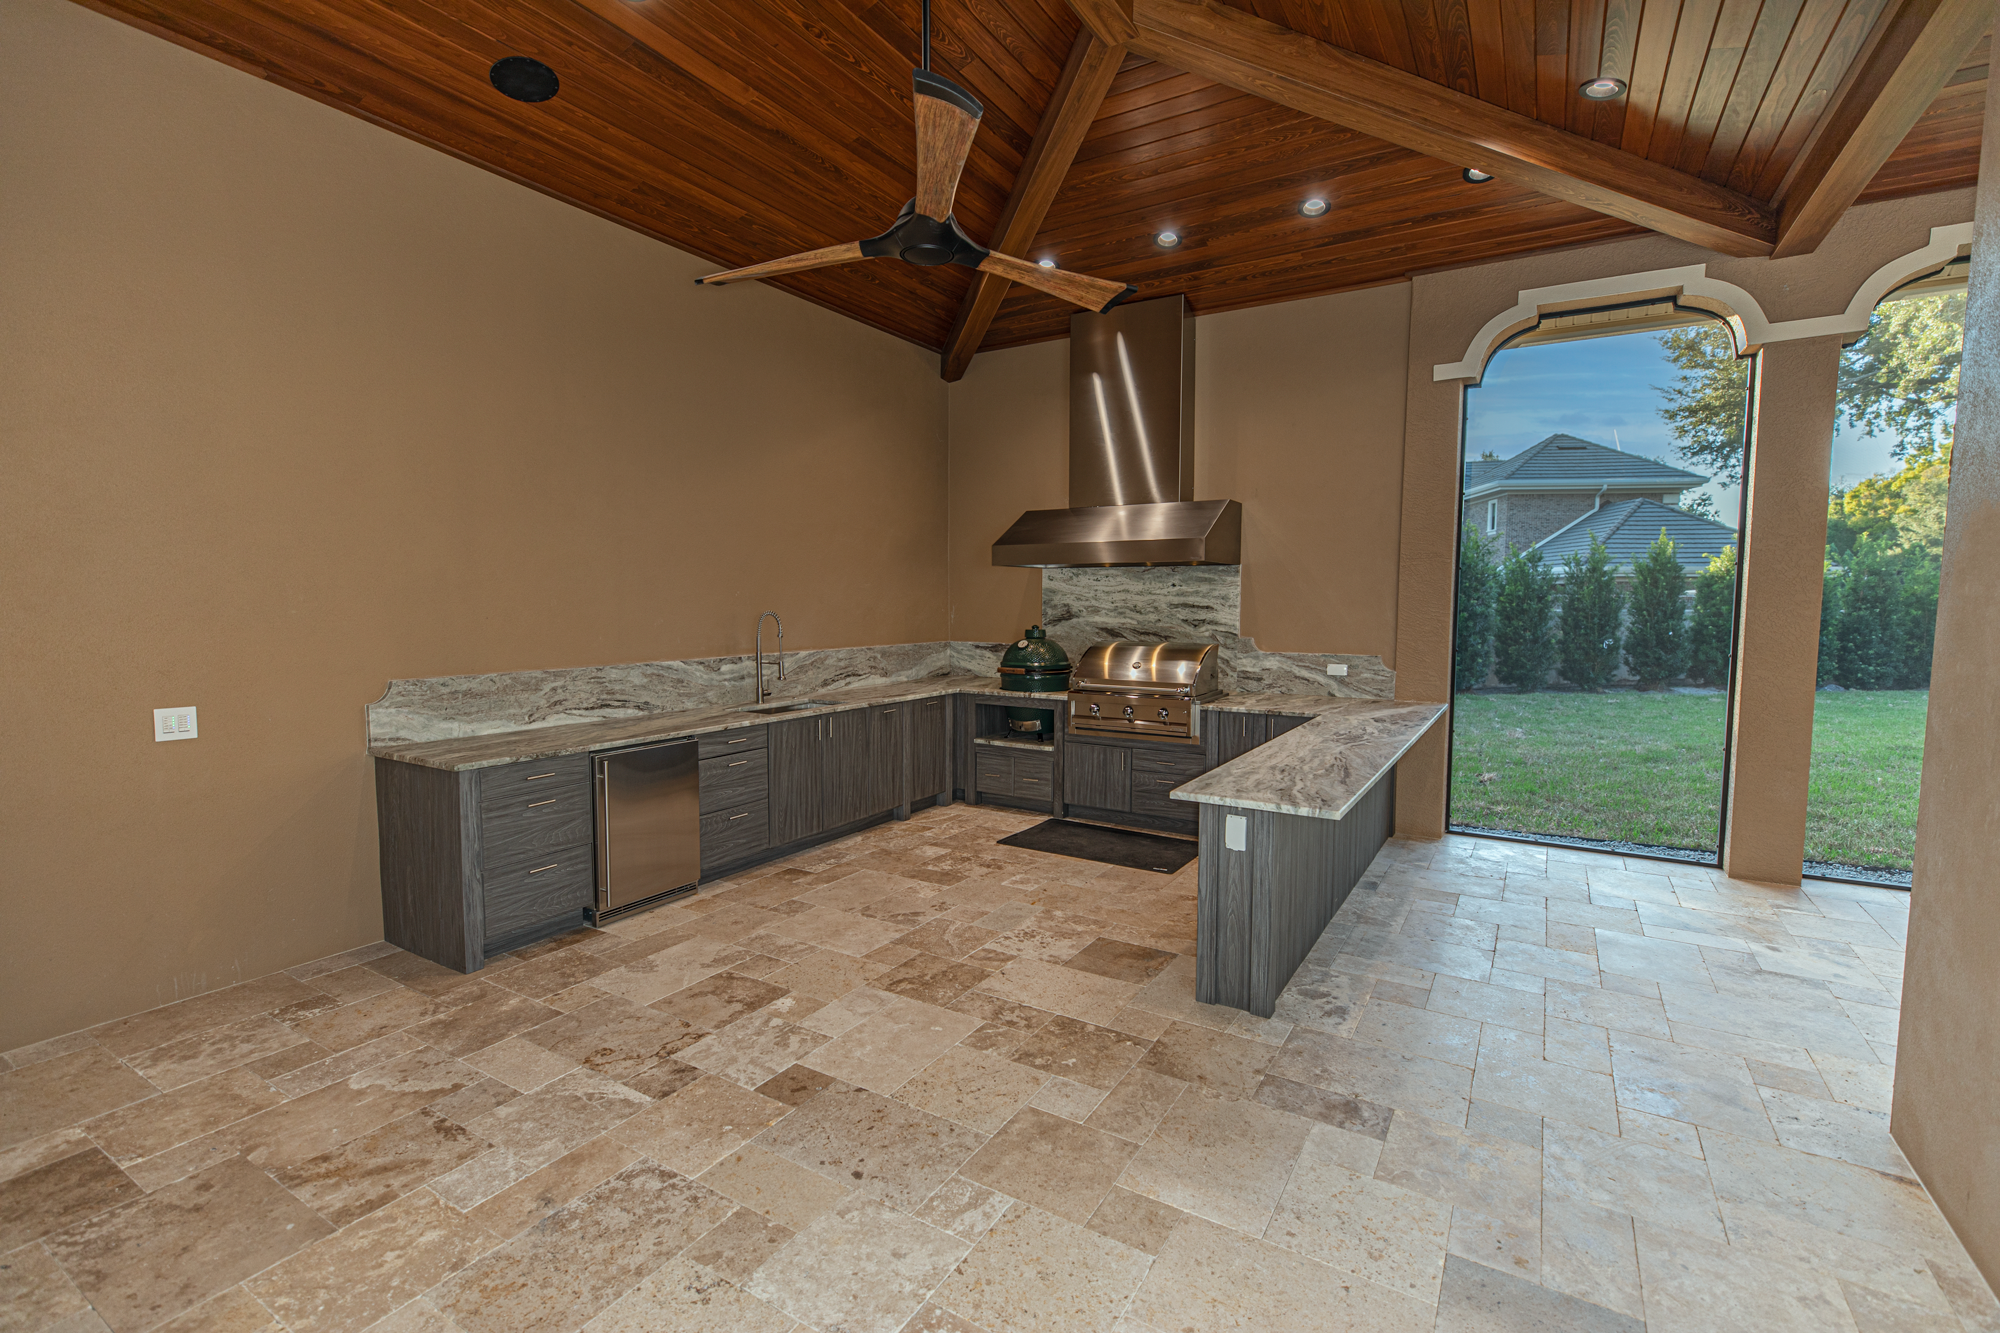 Custom Outdoor Kitchen WIth Artisan Grill and Big Green Egg Tampa Florida WEB